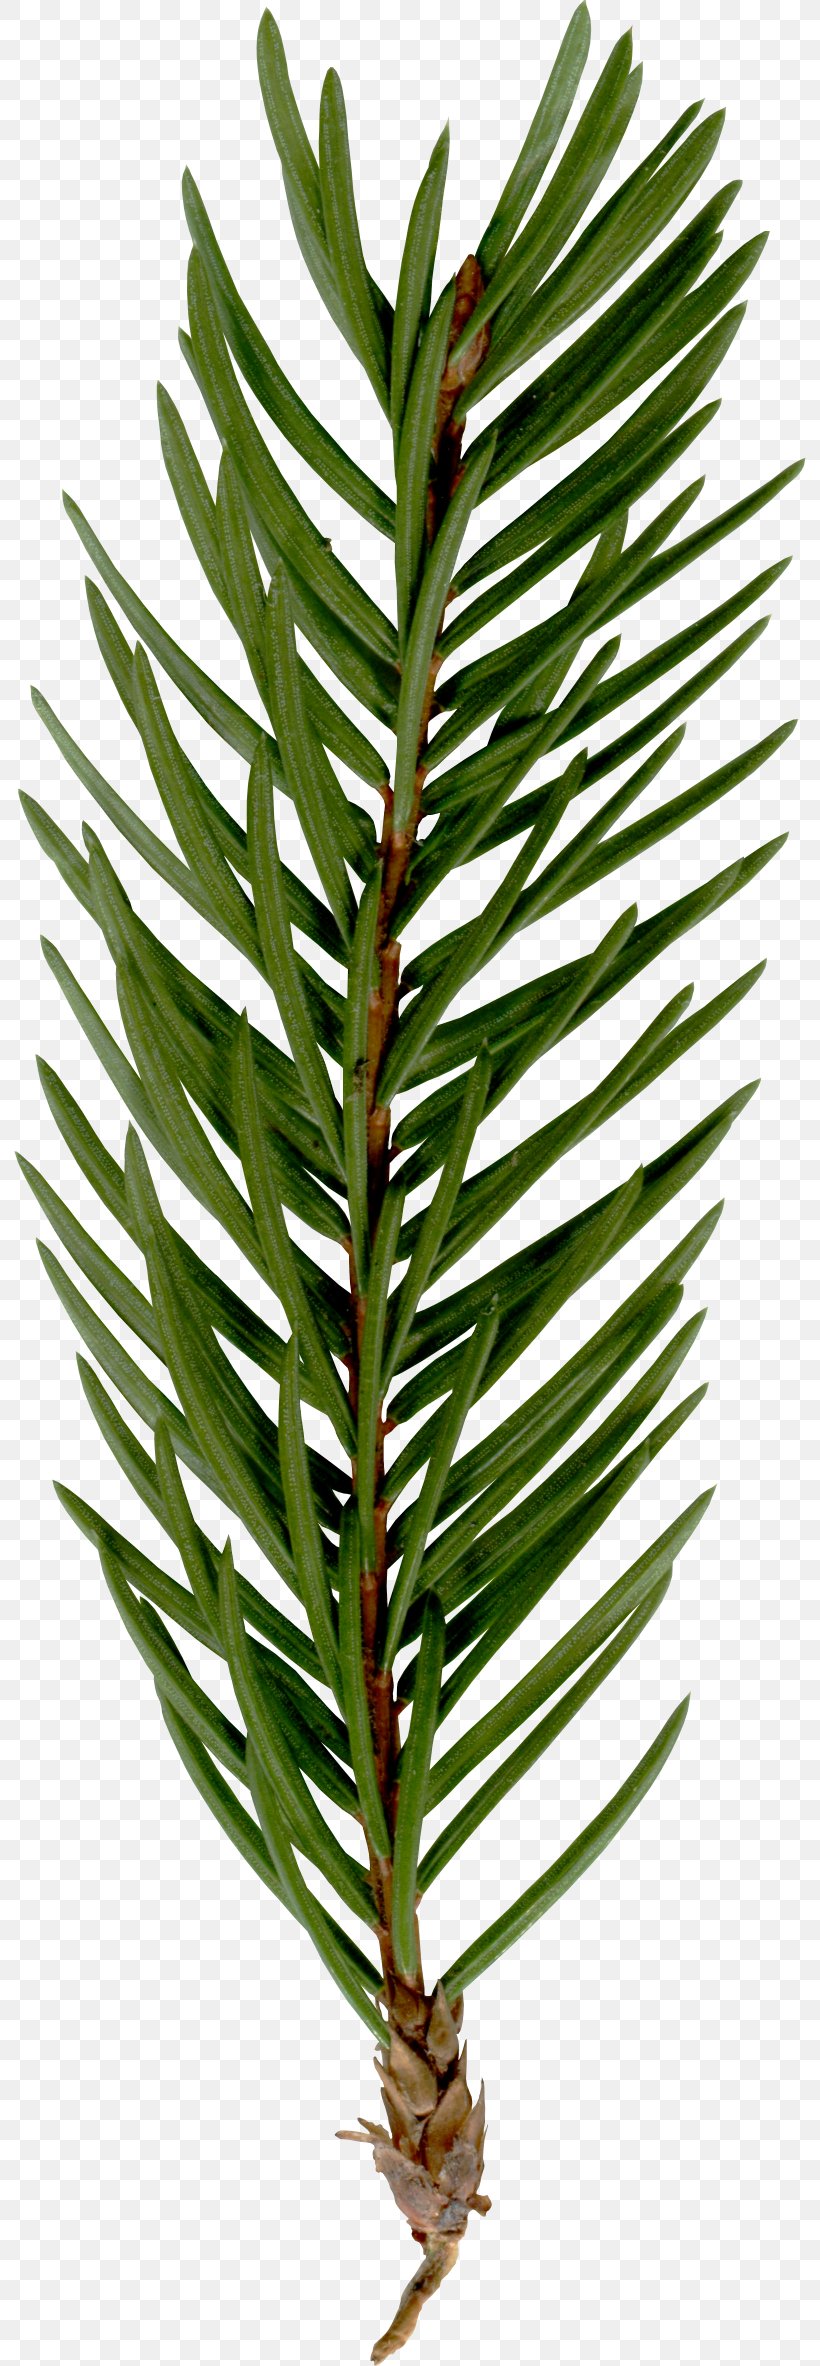 Fir Spruce Twig Plant Stem Terrestrial Plant, PNG, 792x2366px, Fir, Branch, Conifer, Evergreen, Pine Family Download Free